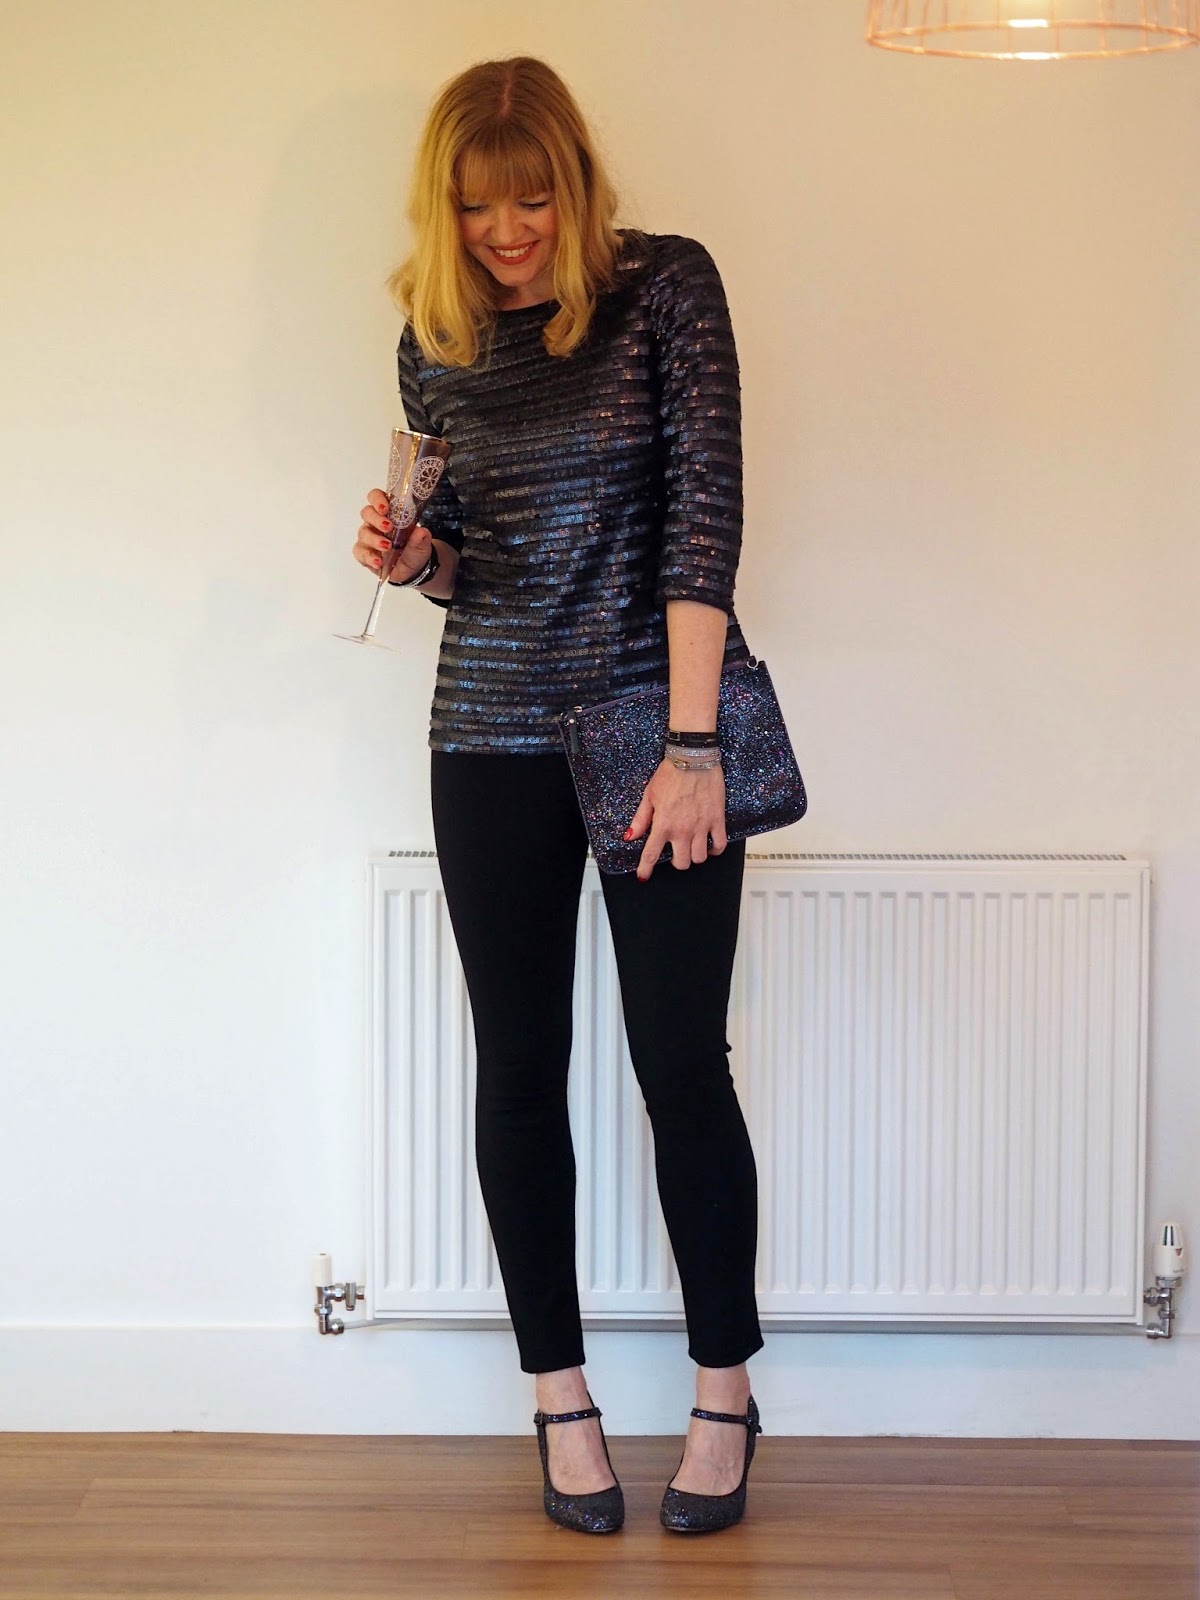 Sequin Leggings Outfit-Merry Xmas & Happy Holidays! - The Travelin